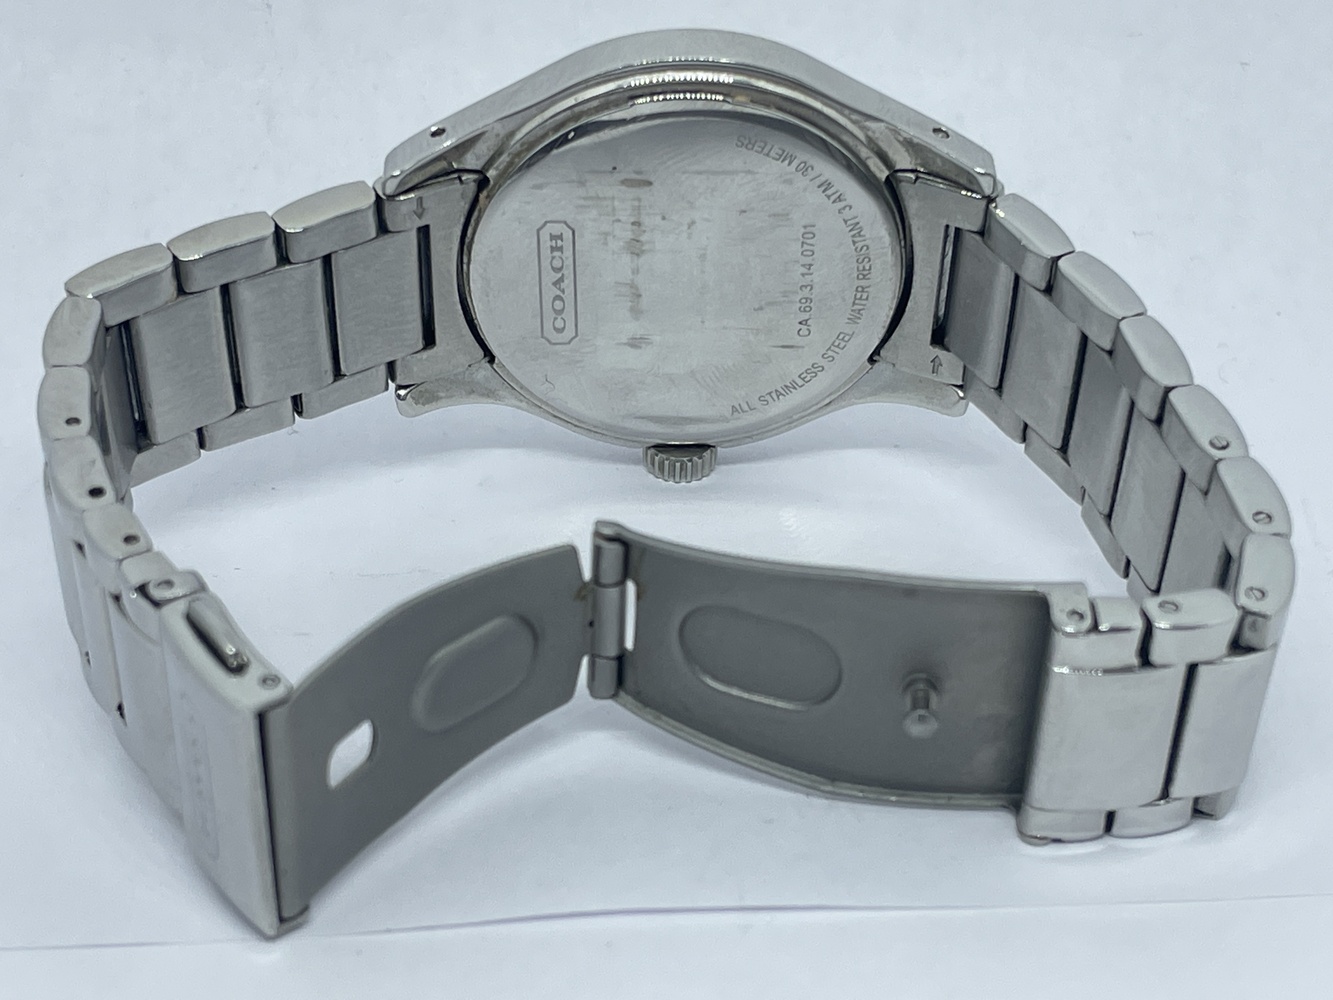 Coach Stainless Steel Watch 